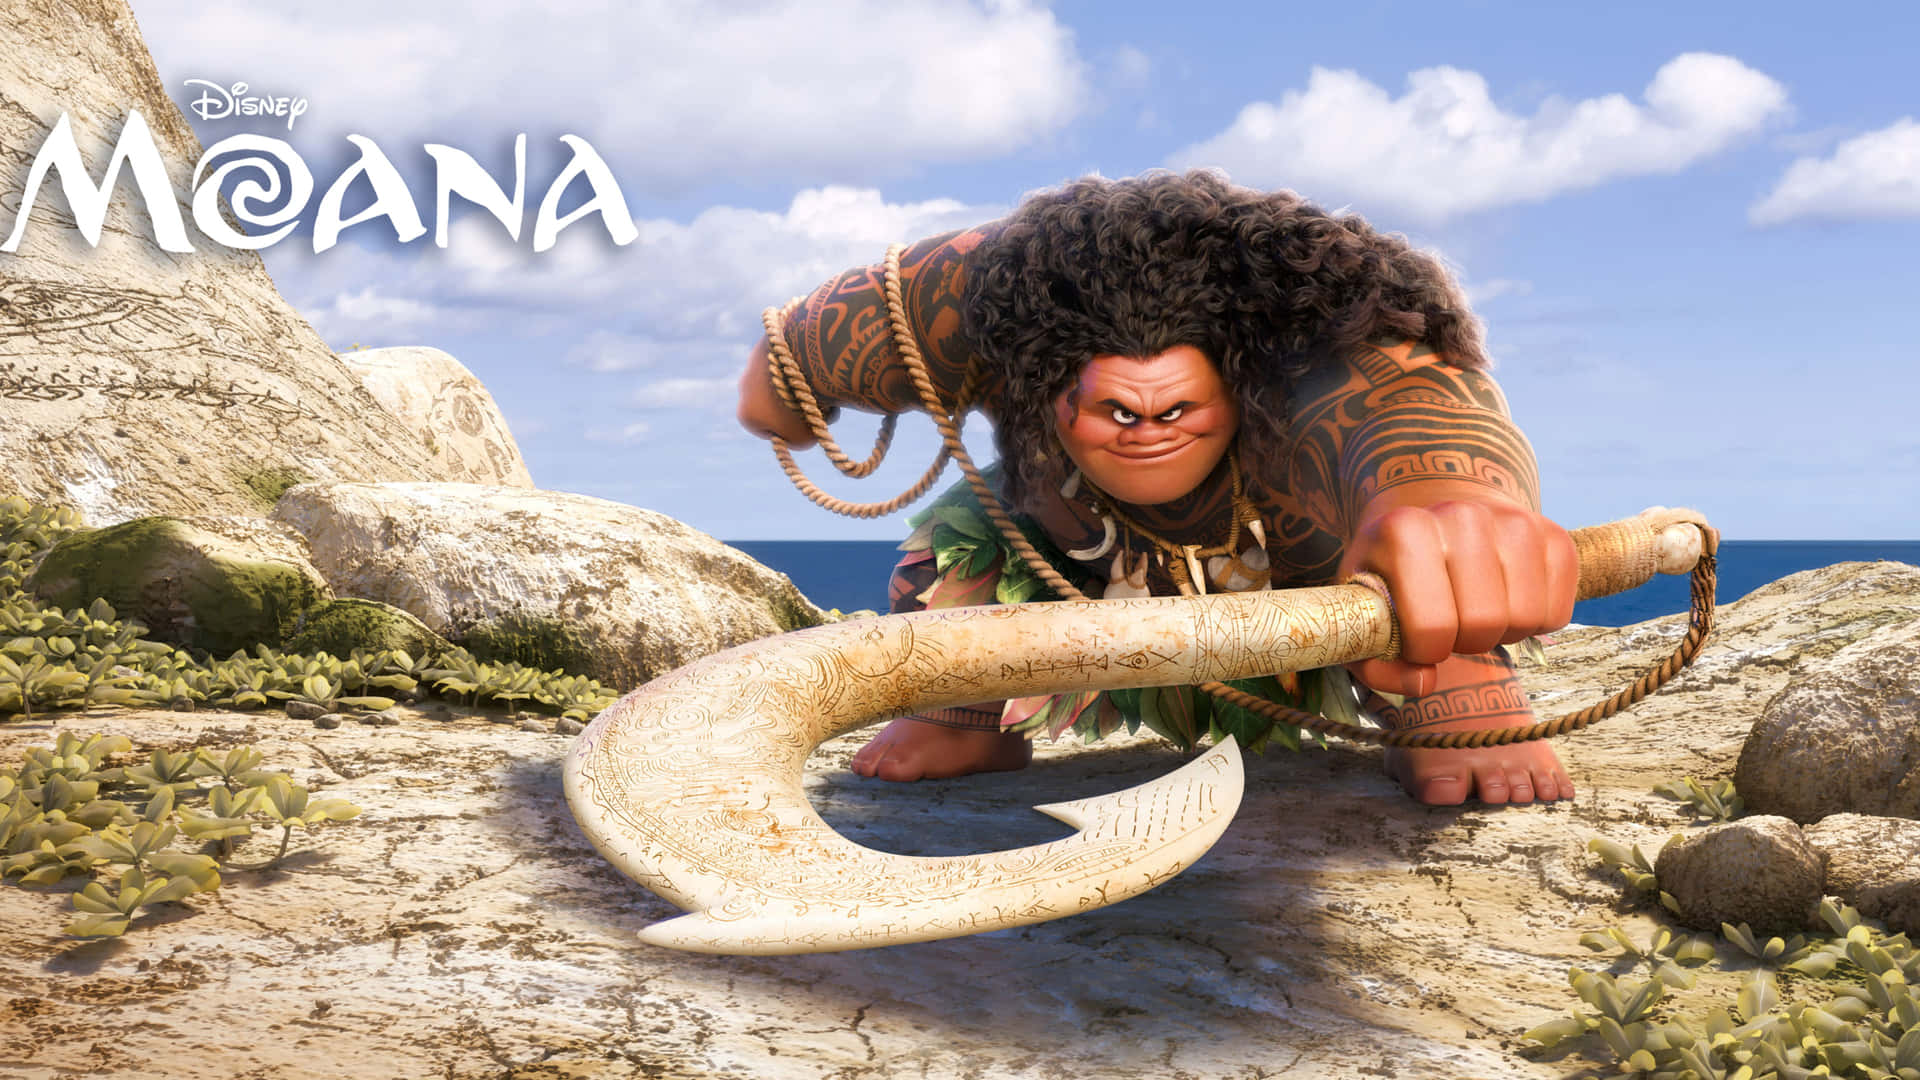 Moana, the strong-willed daughter of Chief Tui, sets off on an epic journey of self-discovery.